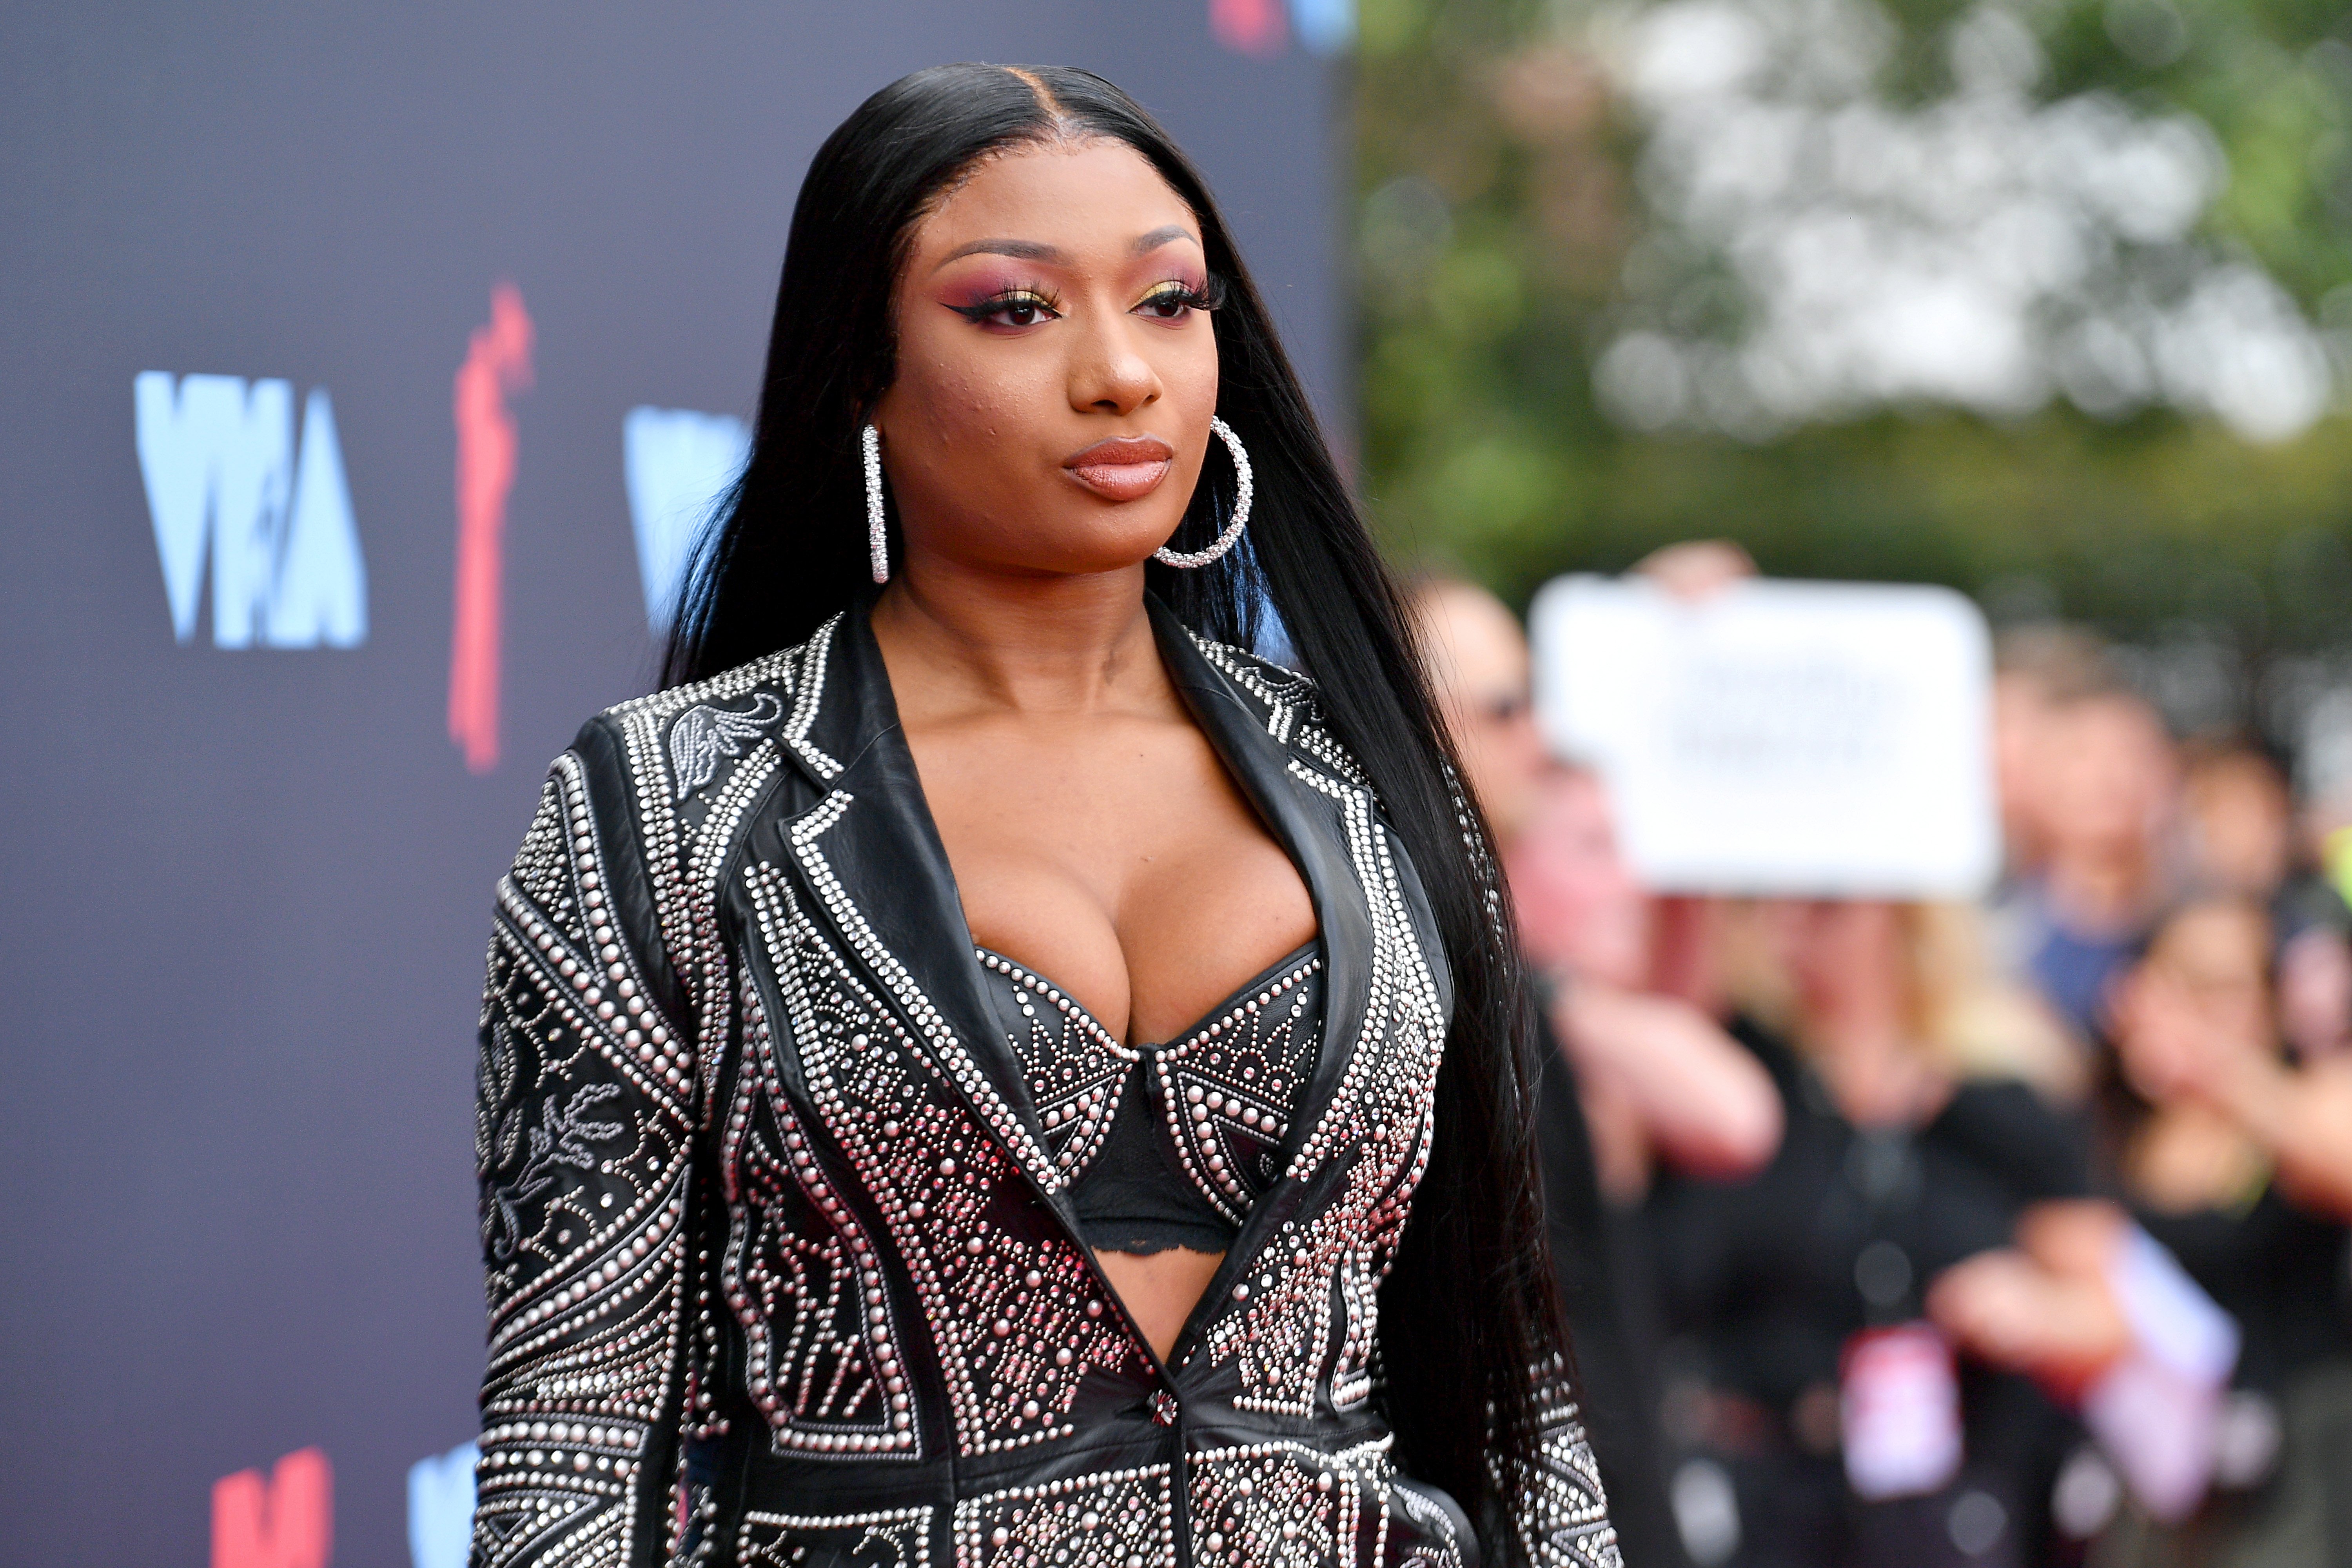 Megan Thee Stallion at the 2019 MTV Video Music Awards on August 26, 2019 in Newark, New Jersey. | Source: Getty Images